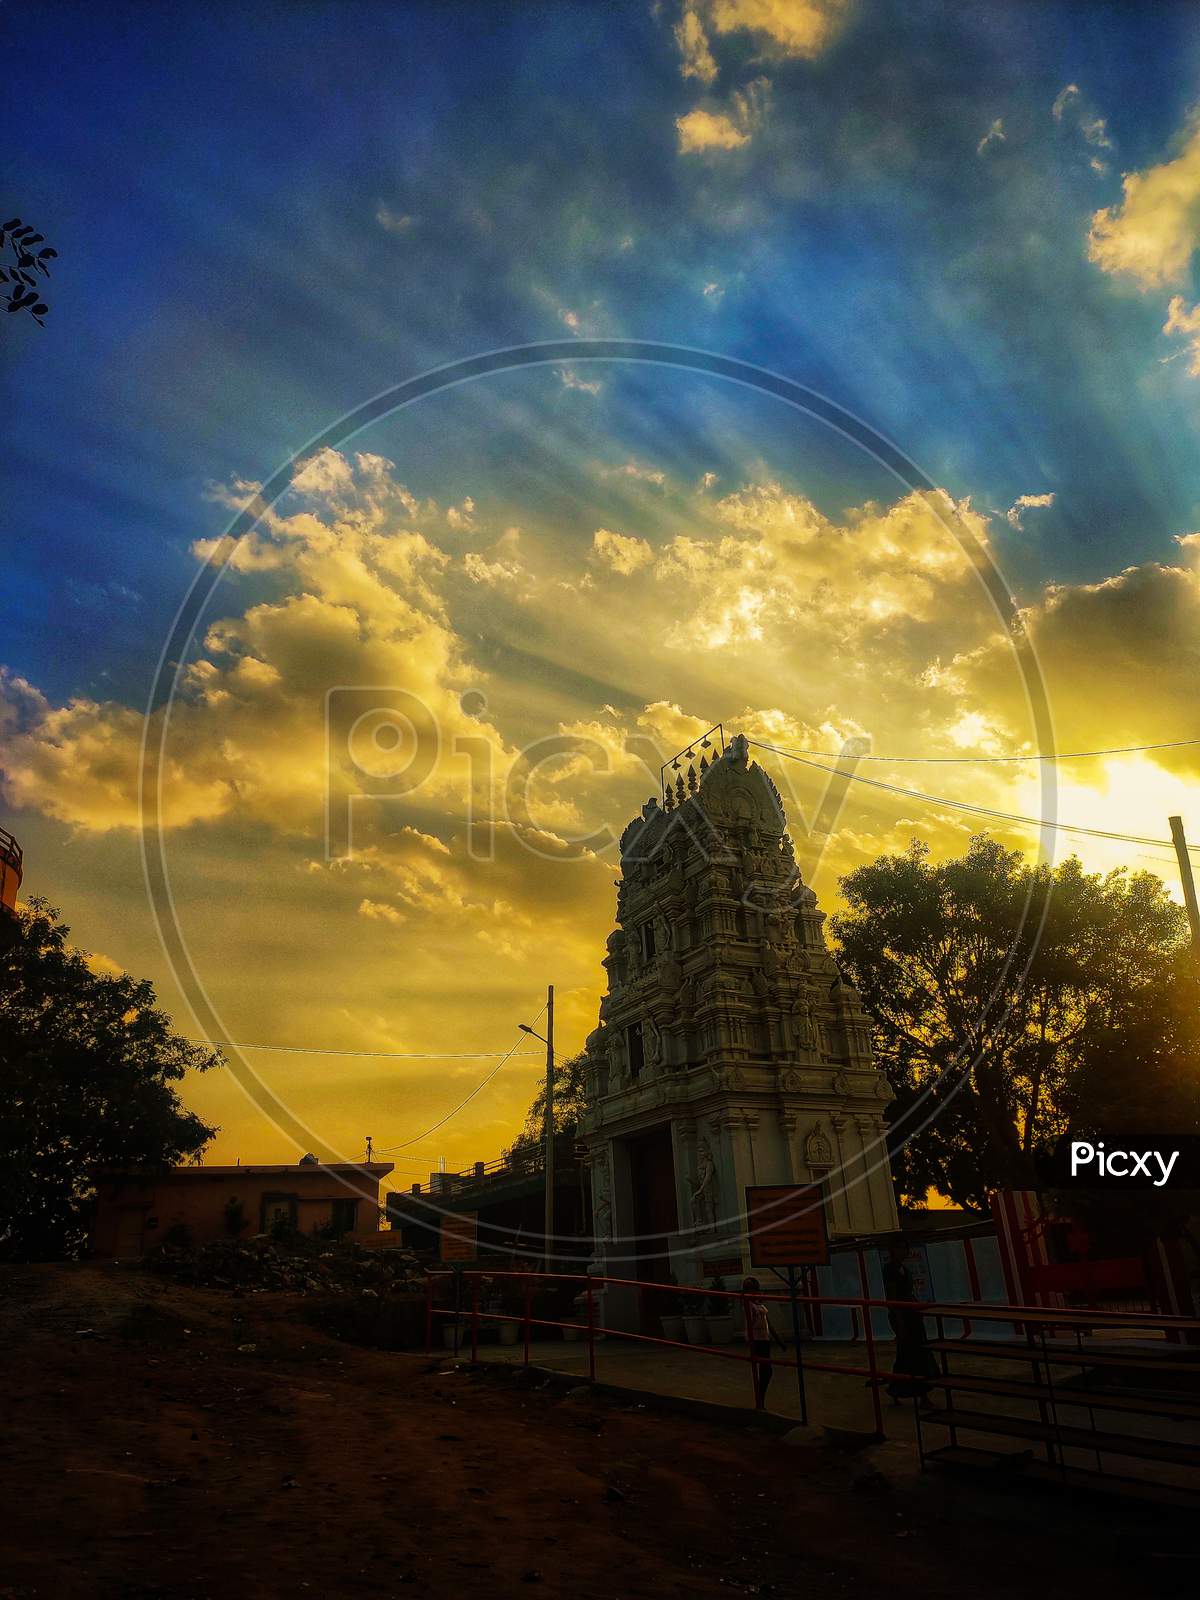 Hindu Temple Shrine With Sunset Sky In Background